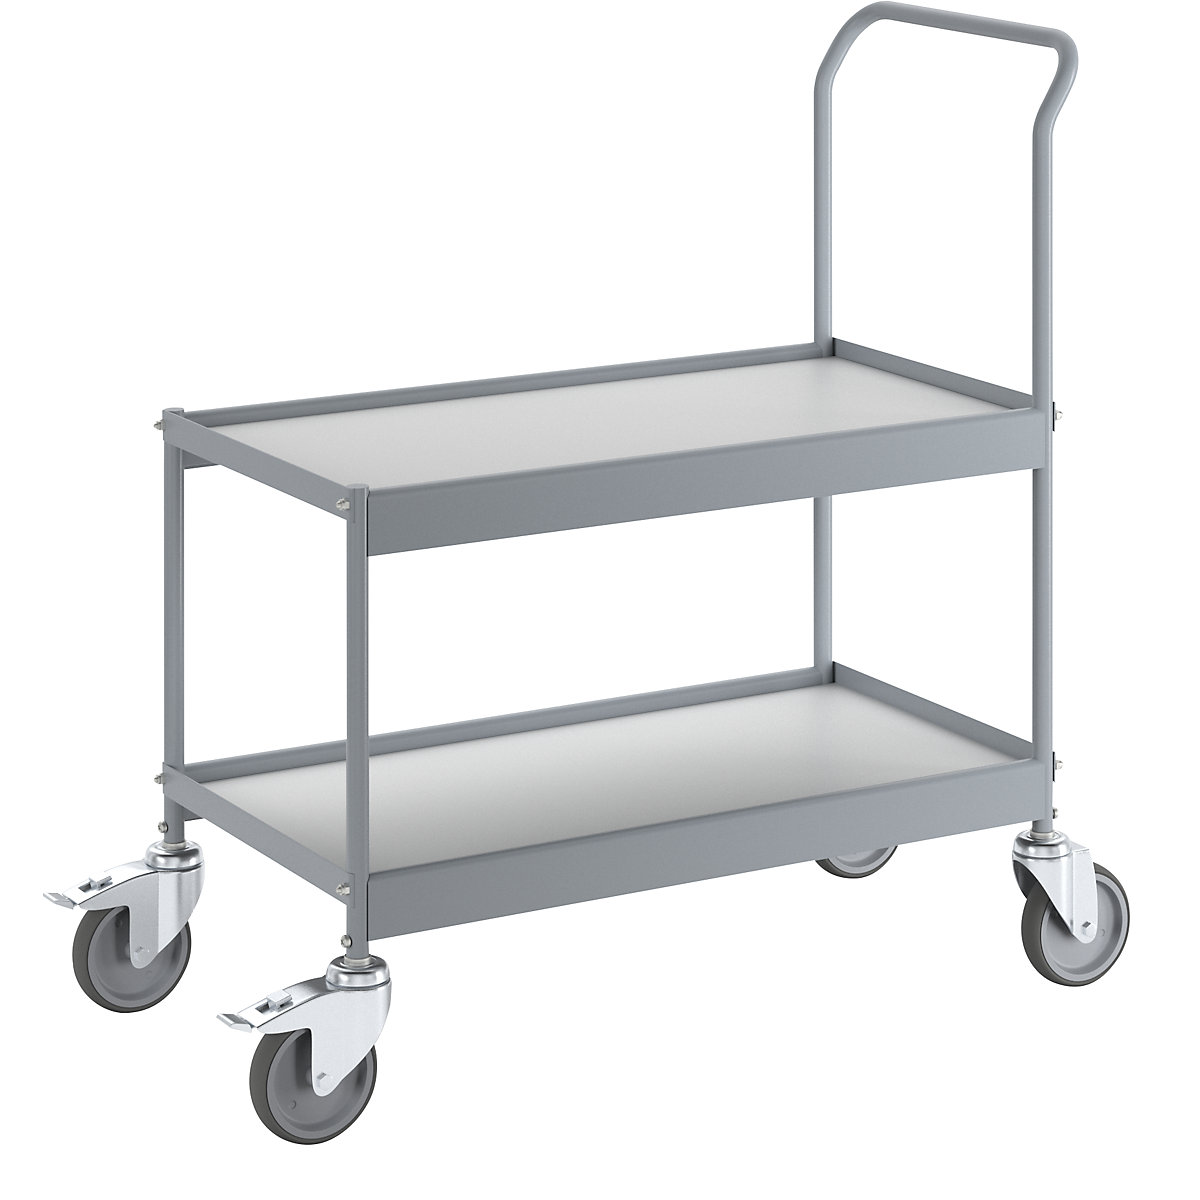 Table trolley, max. load 150 kg on 2 shelves, LxW 790 x 425 mm, with 2 swivel castors with double stops-11